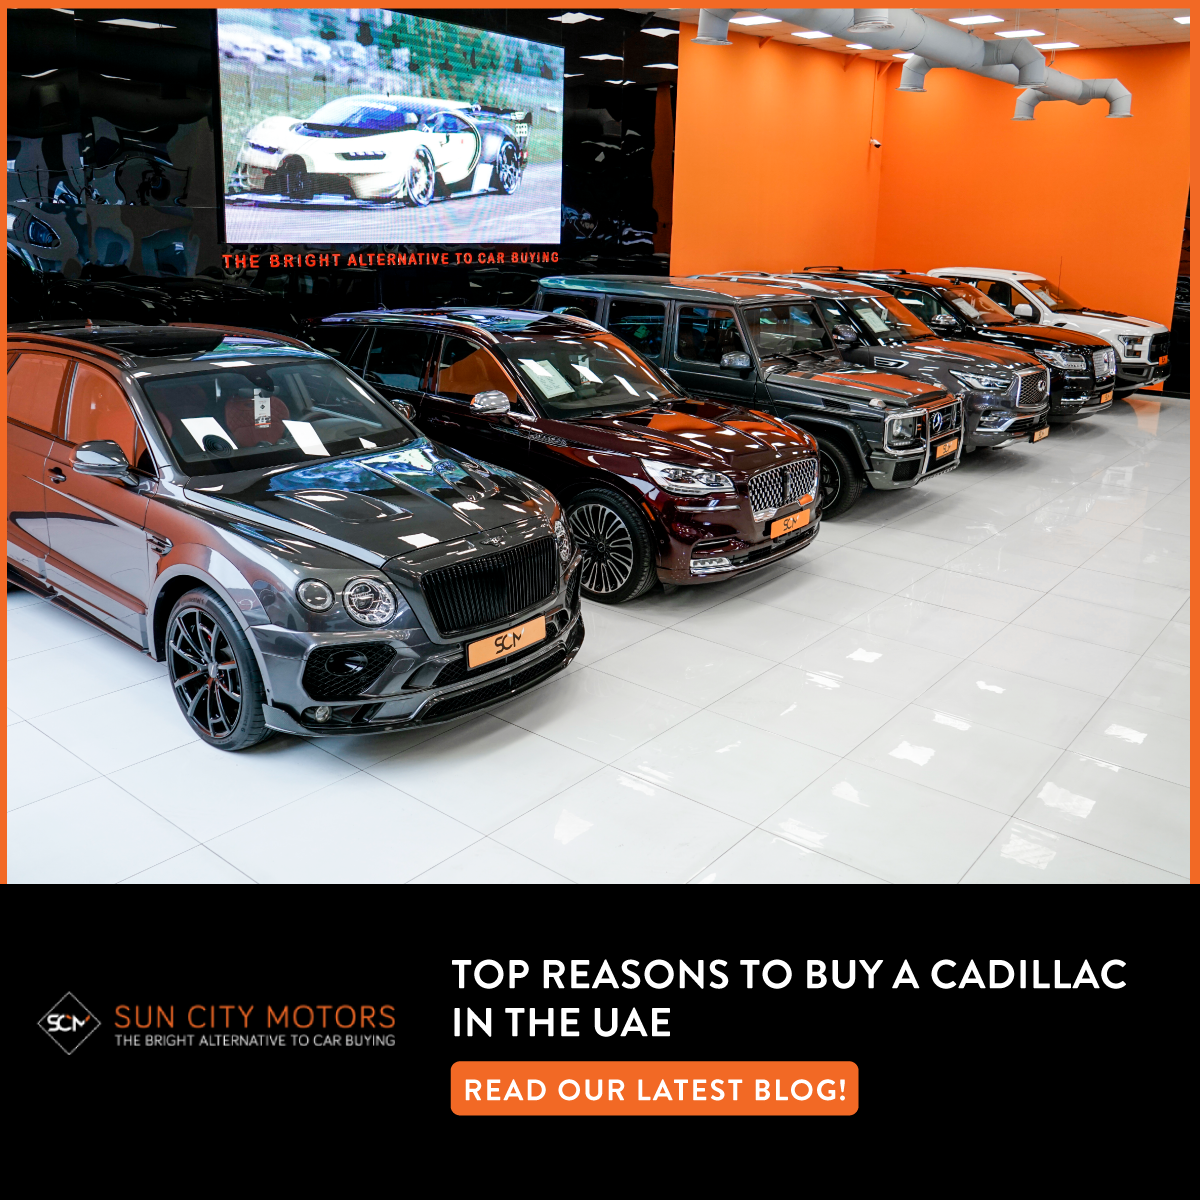 Top Reasons to Buy a Cadillac in the UAE